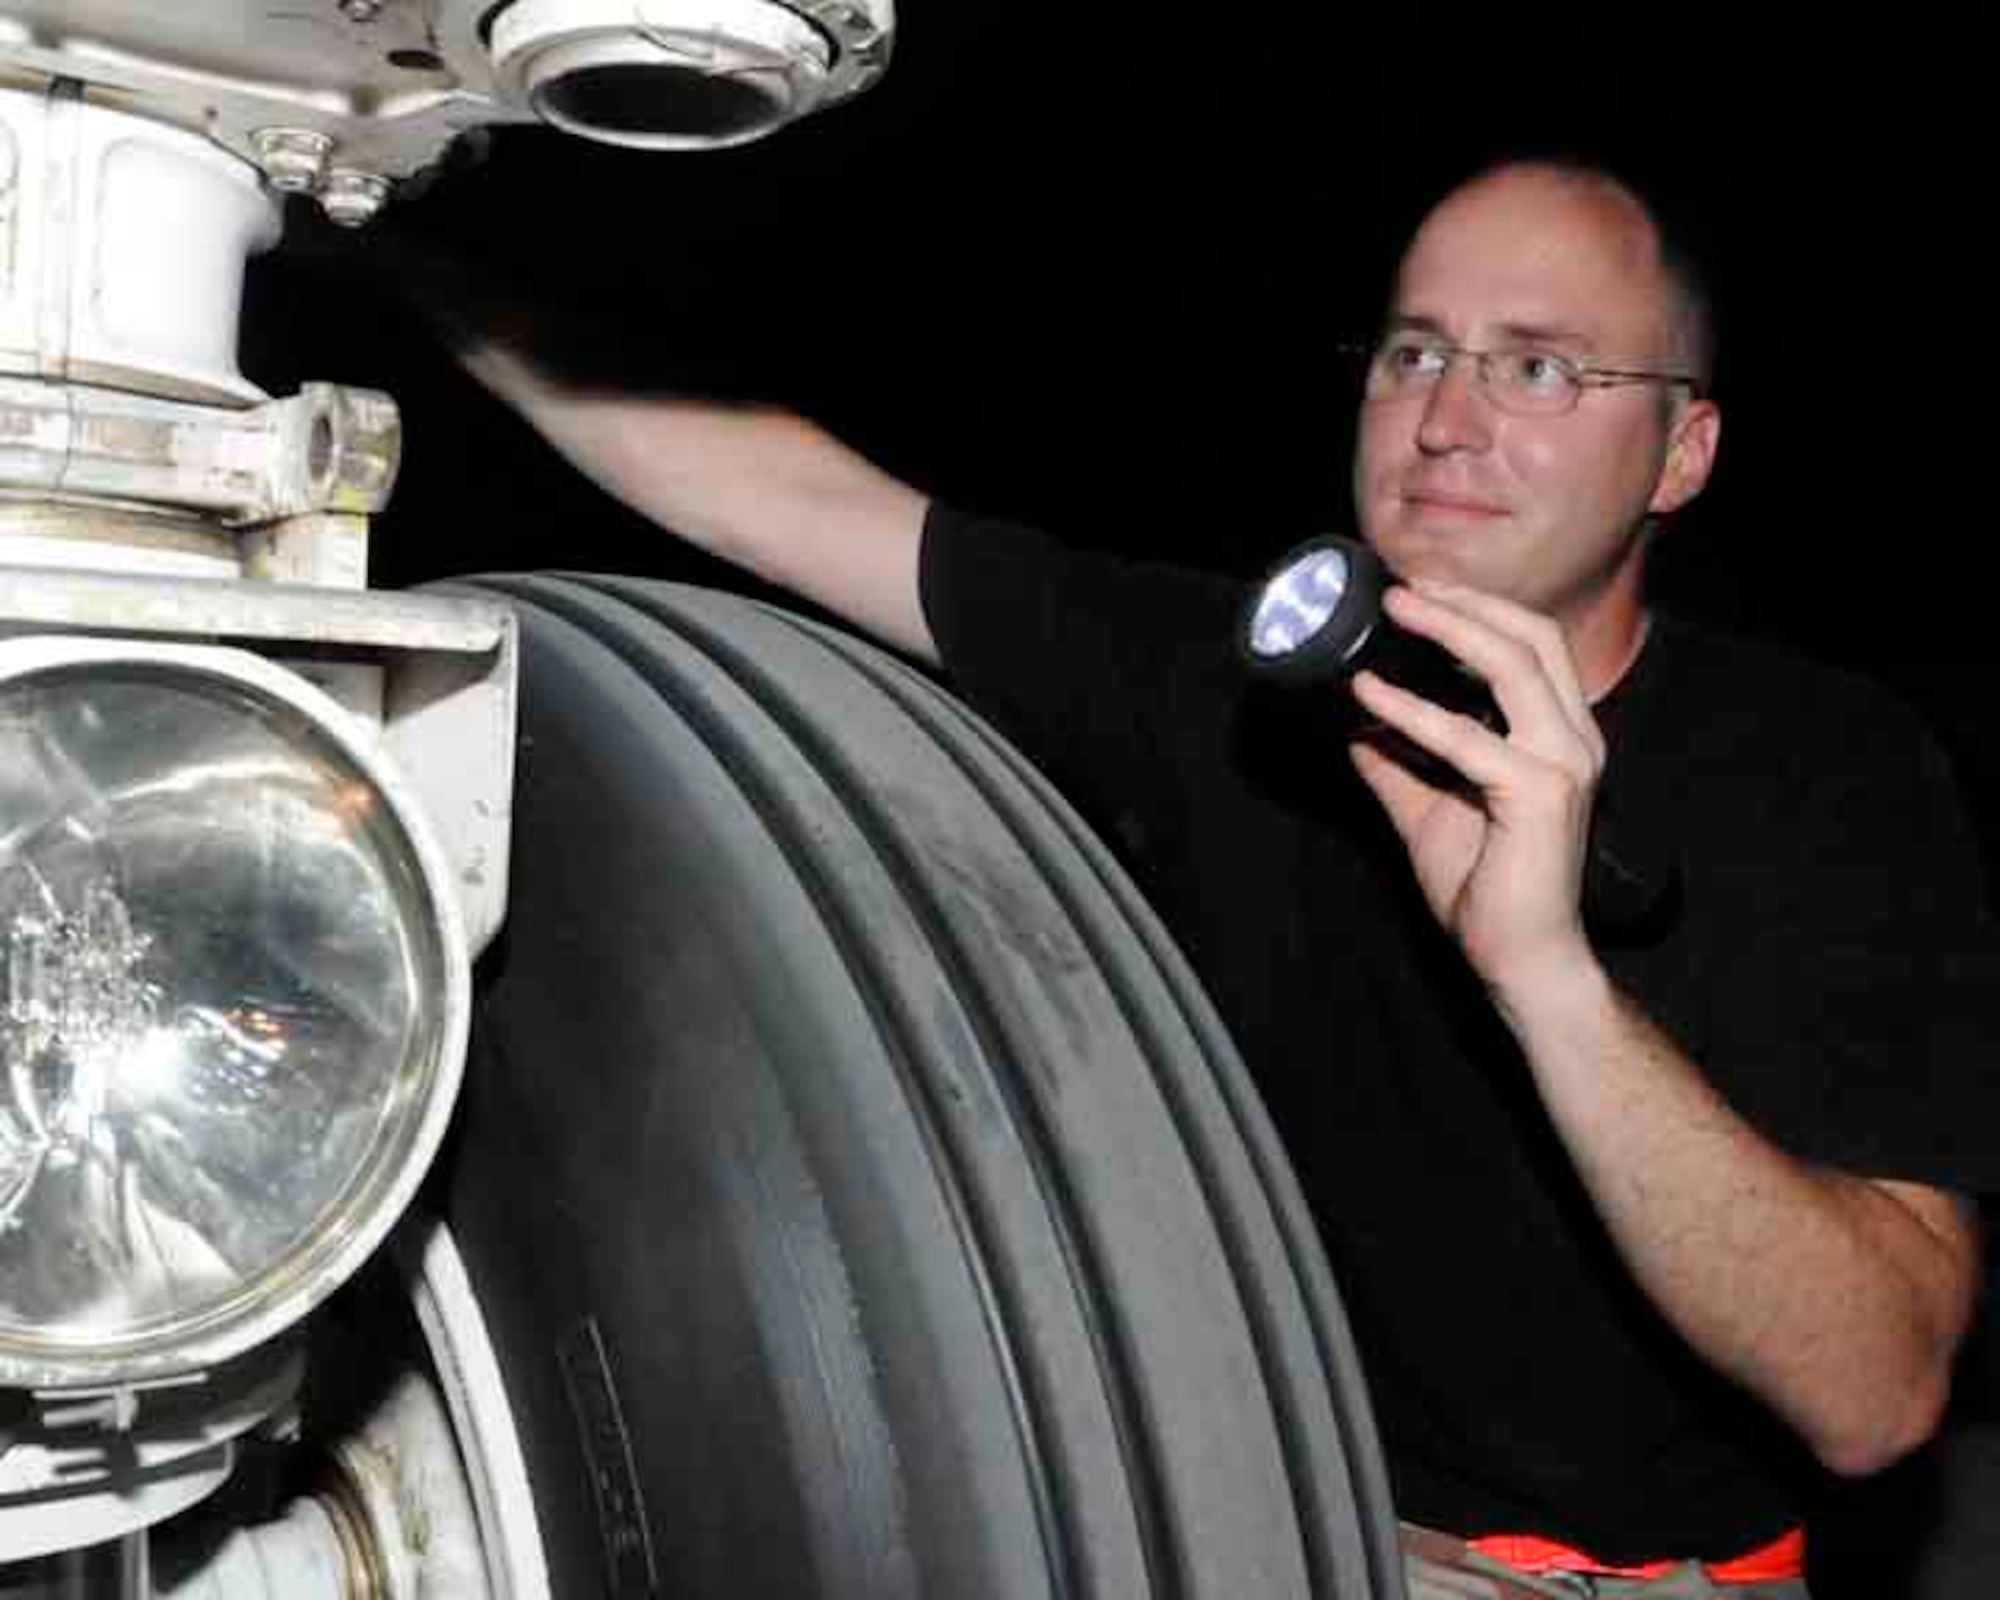 SOUTHWEST ASIA—Staff Sgt. Chad Arrowsmith, a KC-135 crew chief deployed from Grand Forks Air Force Base, N.D., inspects the aircraft wheel and tire ensemble with a flashlight for higher visibility during the night May 29. Sergeant Arrowsmith, who works noon to midnight each day, enjoys working during the night because the sun has burned off most of the humidity and isn’t beating down on the tankers any more. (U.S. Air Force photo/ Senior Airman Domonique Simmons)